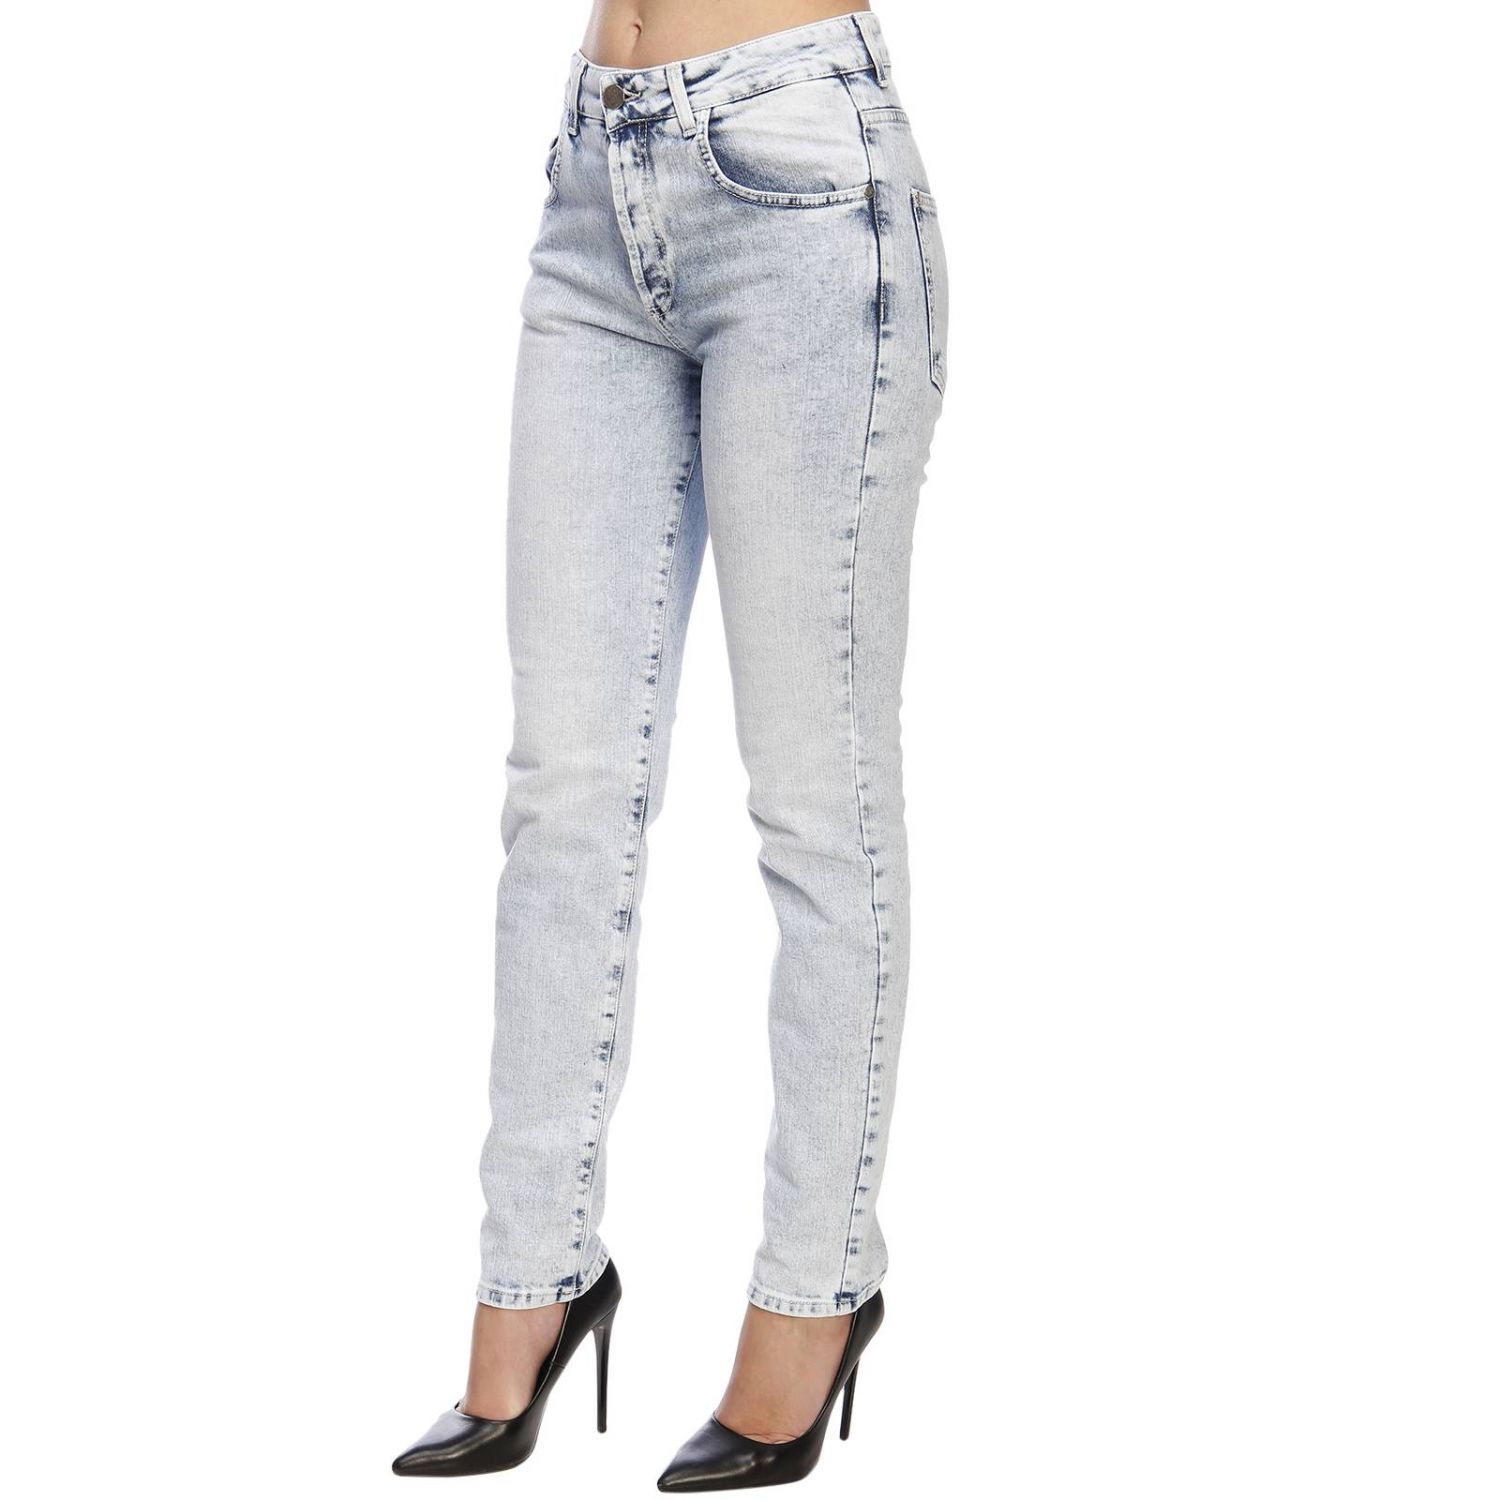 Frankie Morello Outlet: Jeans women - Stone Washed | Jeans Frankie ...